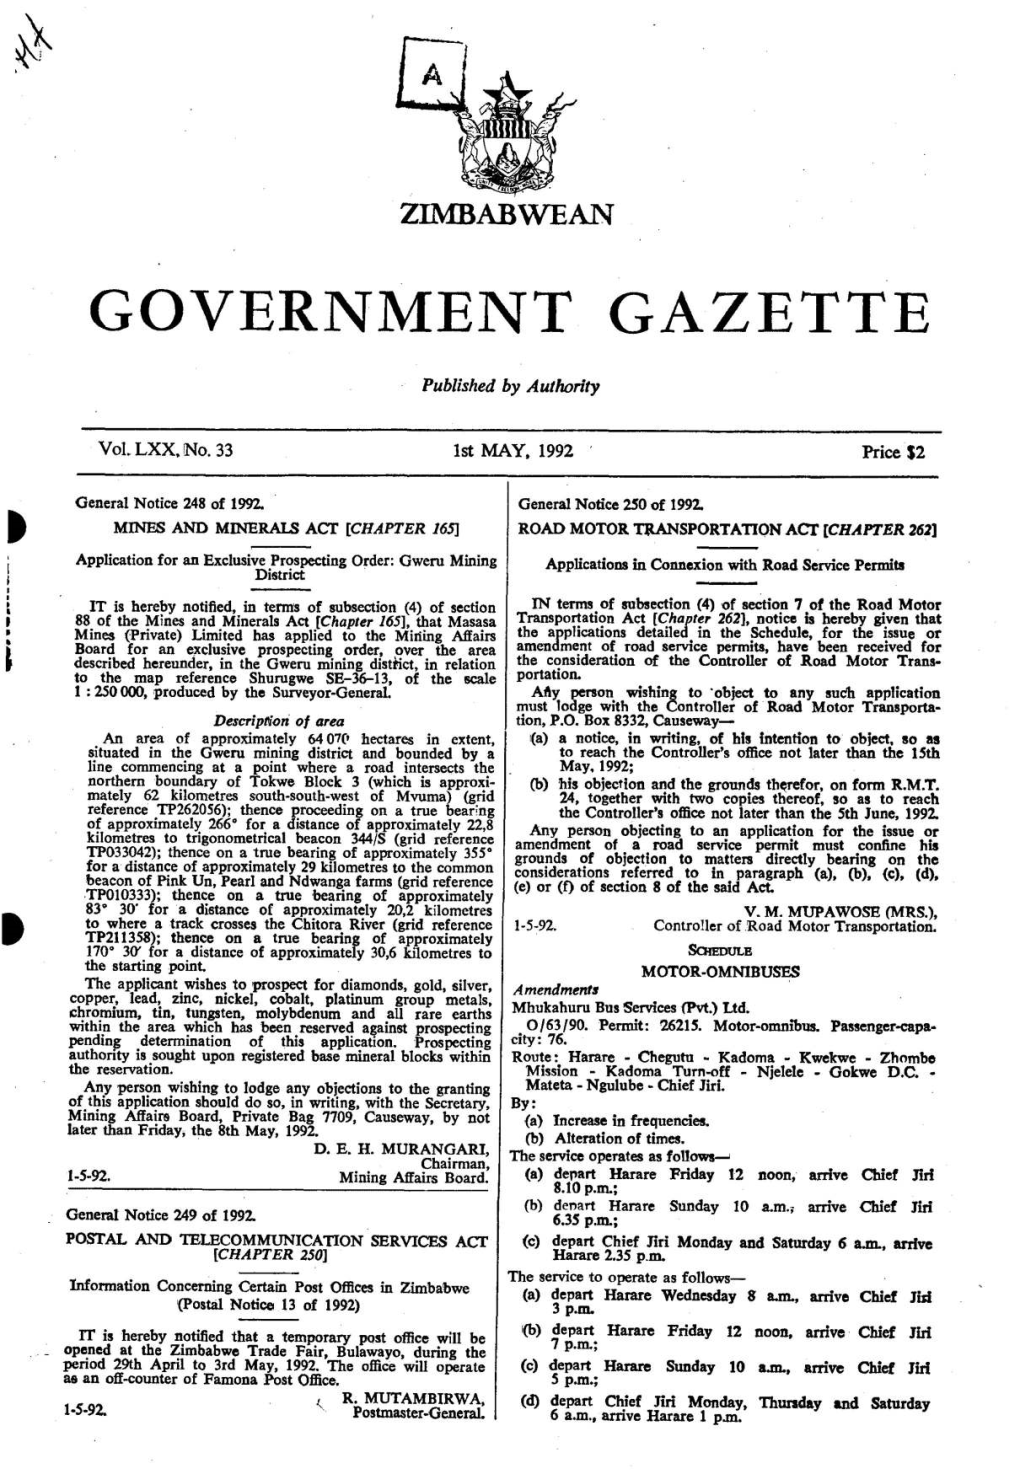 GOVERNMENT GAZETTE, 1St May, 1992